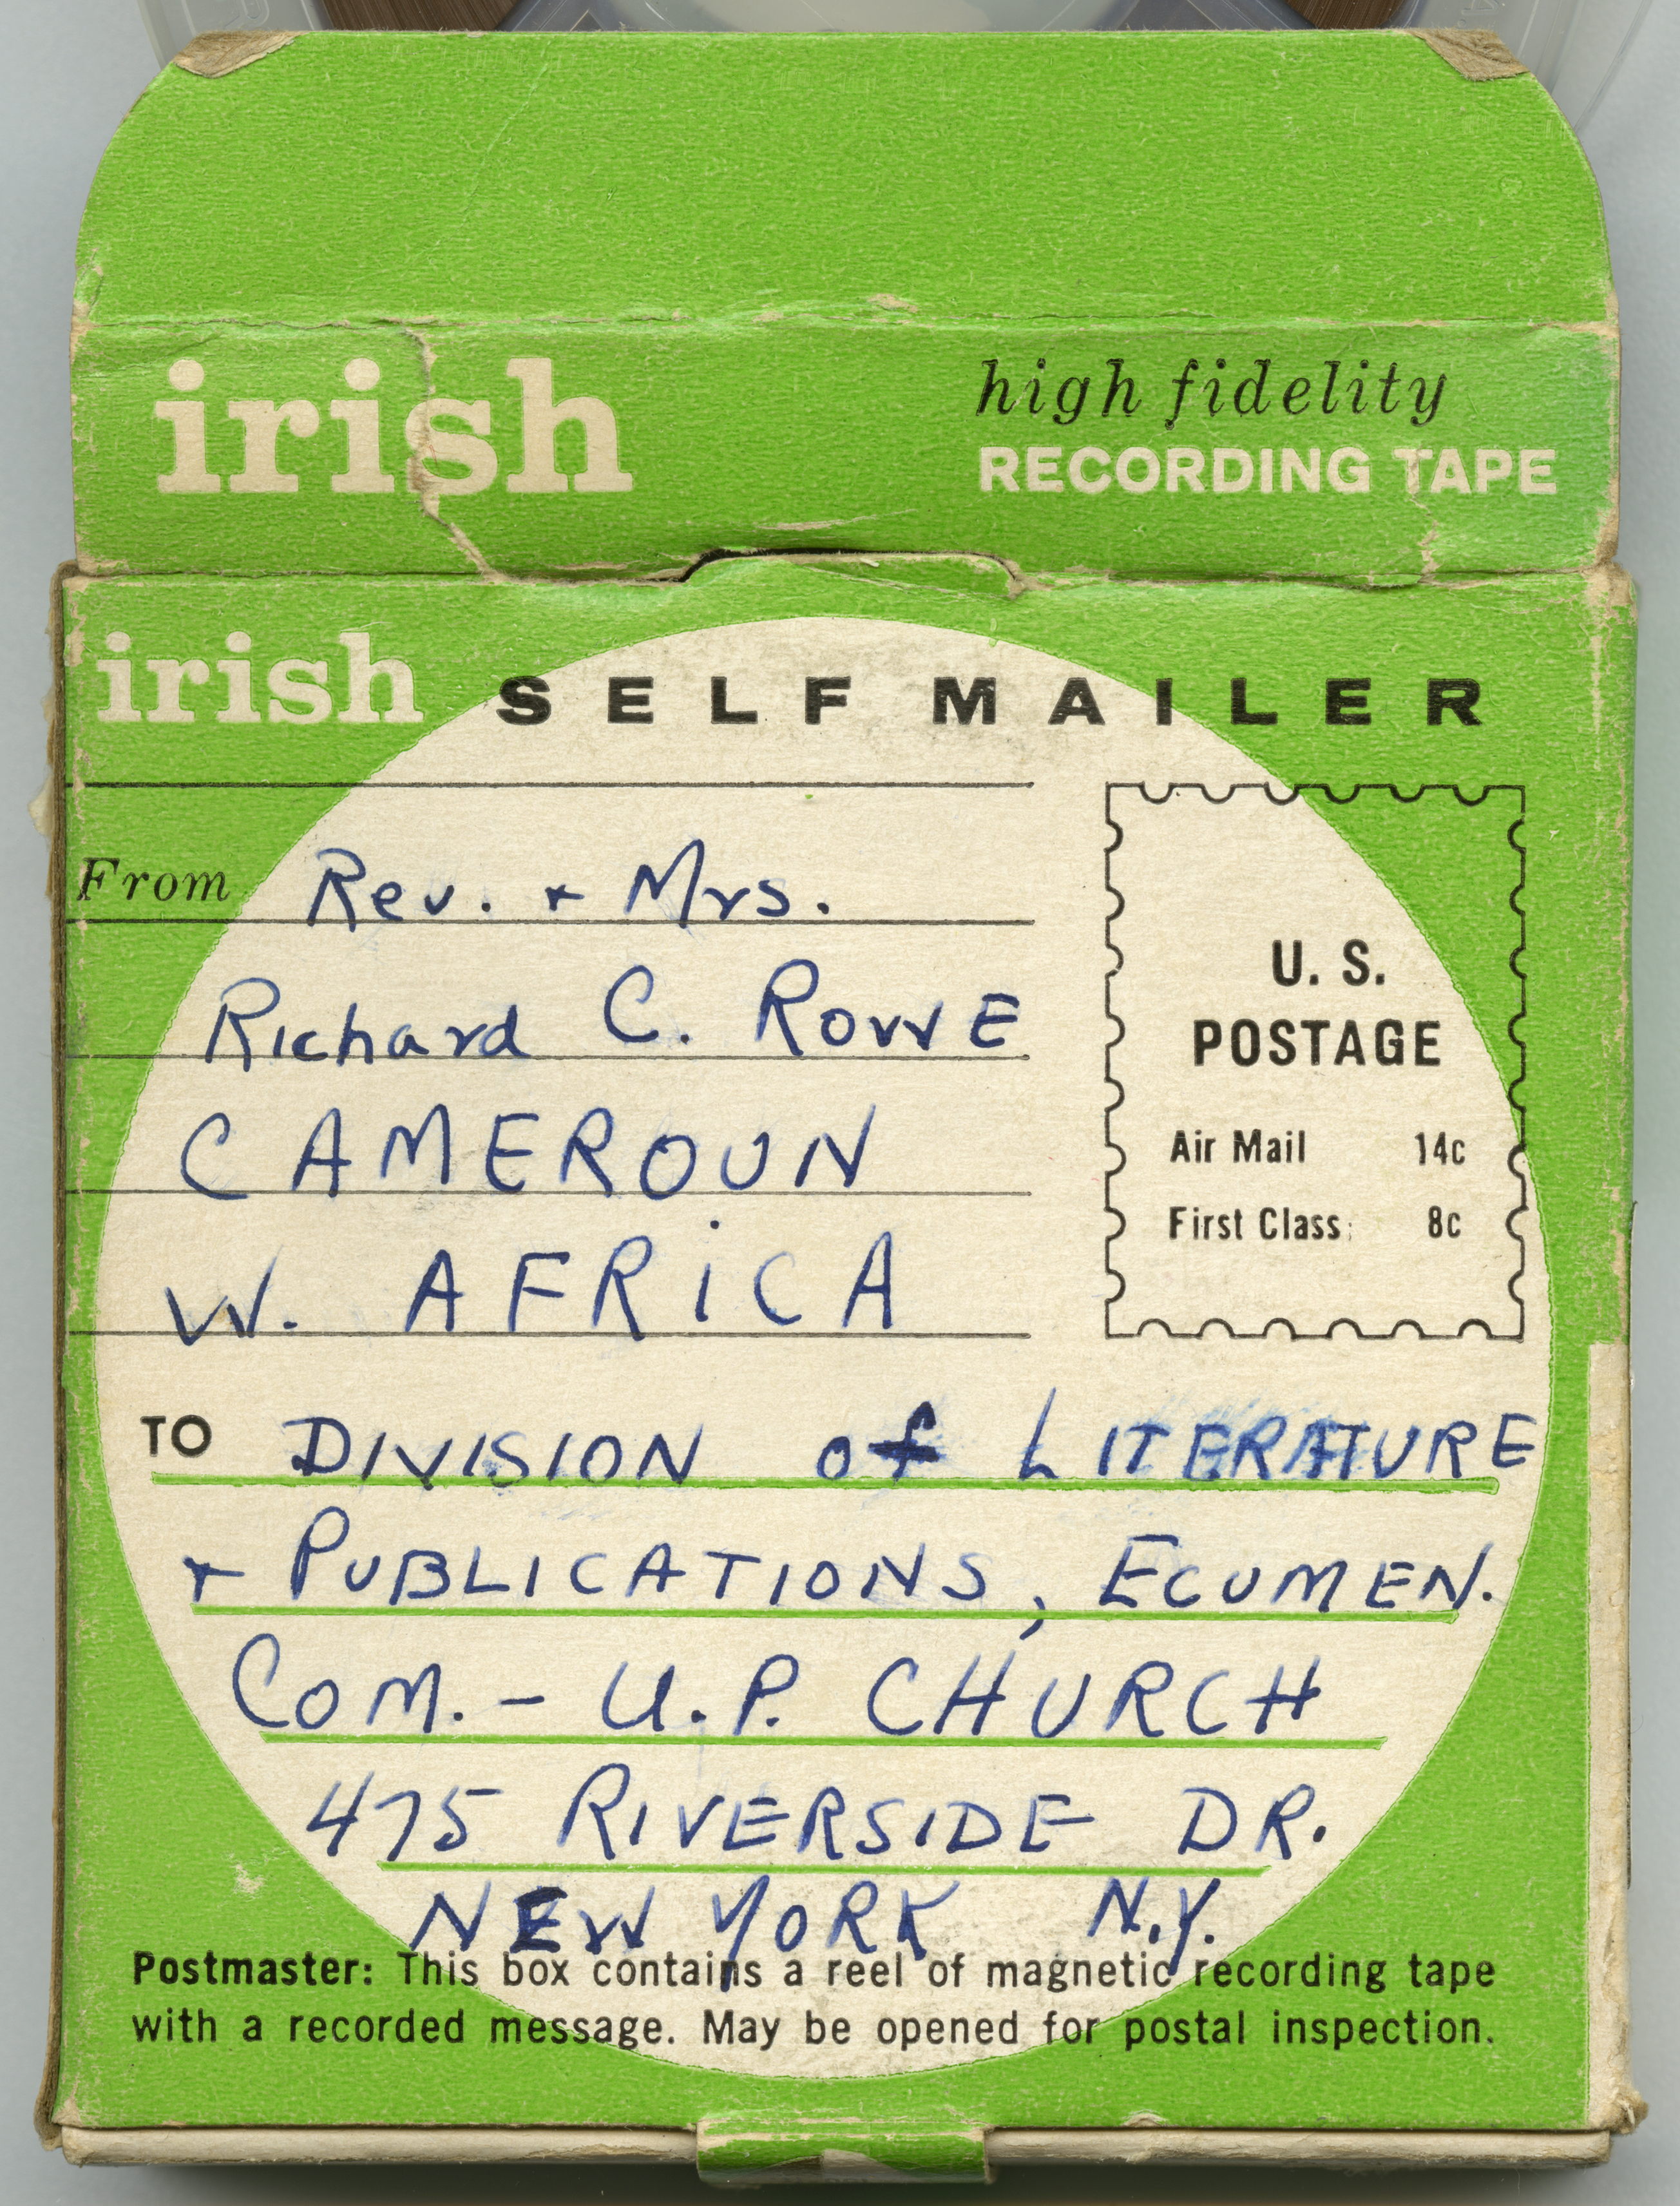 Richard C. and Anna Mae Rowe report from Cameroon, 1960, side 2.